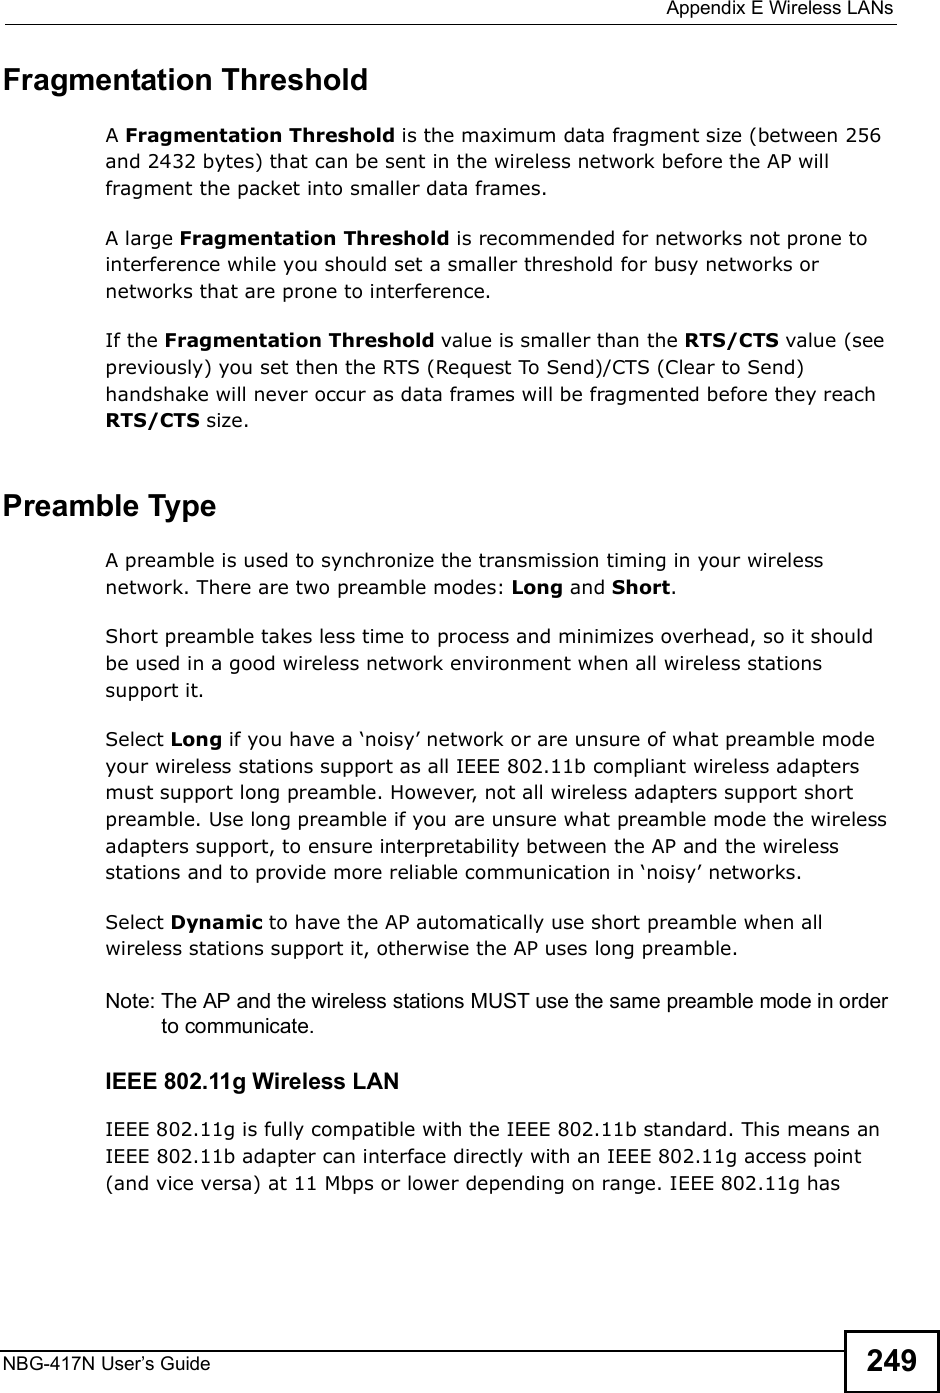  Appendix EWireless LANsNBG-417N User s Guide 249Fragmentation ThresholdA Fragmentation Threshold is the maximum data fragment size (between 256 and 2432 bytes) that can be sent in the wireless network before the AP will fragment the packet into smaller data frames.A large Fragmentation Threshold is recommended for networks not prone to interference while you should set a smaller threshold for busy networks or networks that are prone to interference.If the Fragmentation Threshold value is smaller than the RTS/CTS value (see previously) you set then the RTS (Request To Send)/CTS (Clear to Send) handshake will never occur as data frames will be fragmented before they reach RTS/CTS size.Preamble TypeA preamble is used to synchronize the transmission timing in your wireless network. There are two preamble modes: Long and Short. Short preamble takes less time to process and minimizes overhead, so it should be used in a good wireless network environment when all wireless stations support it. Select Long if you have a (noisy! network or are unsure of what preamble mode your wireless stations support as all IEEE 802.11b compliant wireless adapters must support long preamble. However, not all wireless adapters support short preamble. Use long preamble if you are unsure what preamble mode the wireless adapters support, to ensure interpretability between the AP and the wireless stations and to provide more reliable communication in (noisy! networks. Select Dynamic to have the AP automatically use short preamble when all wireless stations support it, otherwise the AP uses long preamble.Note: The AP and the wireless stations MUST use the same preamble mode in order to communicate.IEEE 802.11g Wireless LANIEEE 802.11g is fully compatible with the IEEE 802.11b standard. This means an IEEE 802.11b adapter can interface directly with an IEEE 802.11g access point (and vice versa) at 11 Mbps or lower depending on range. IEEE 802.11g has 